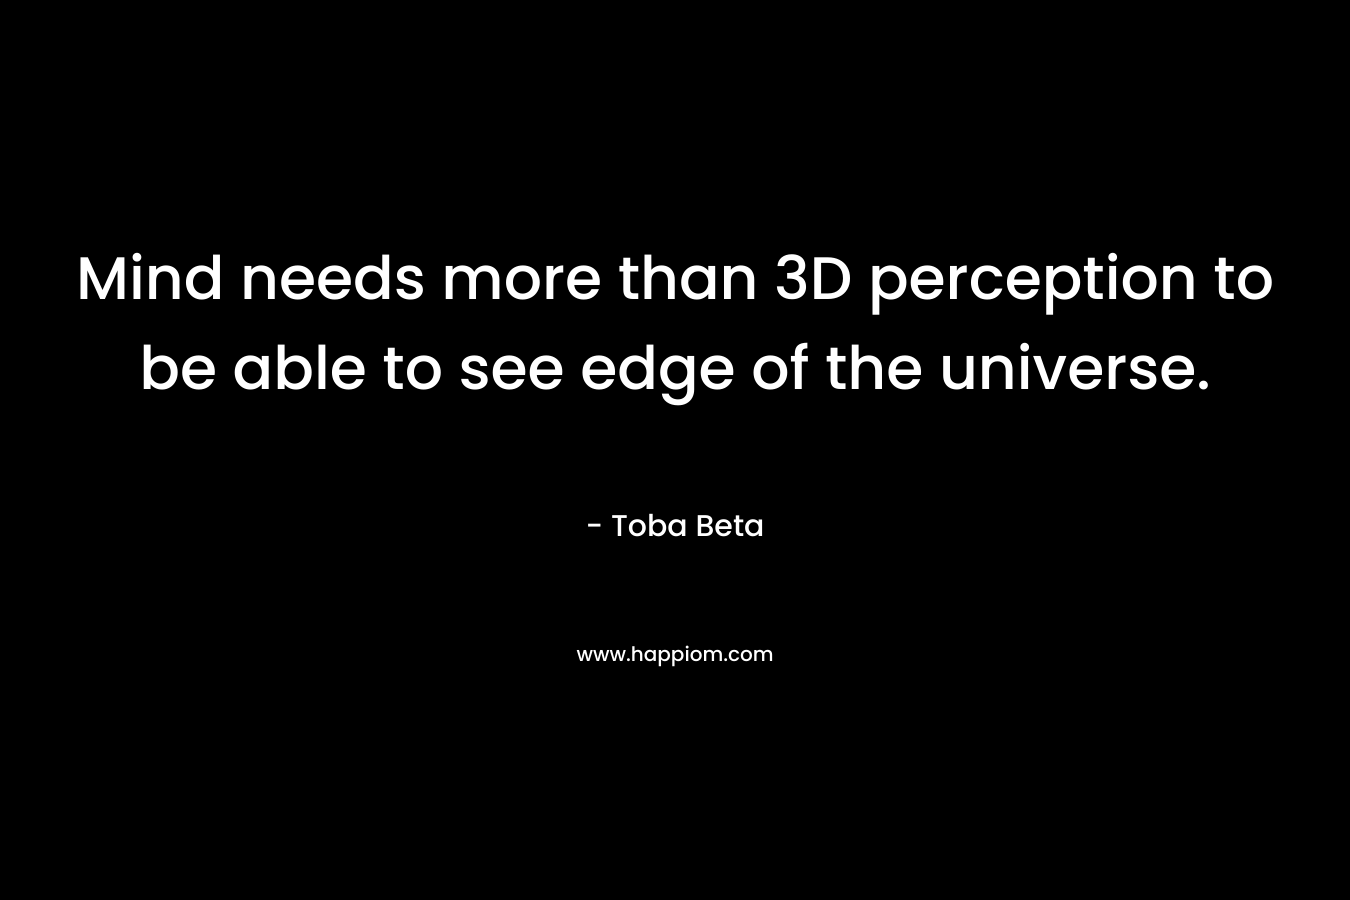 Mind needs more than 3D perception to be able to see edge of the universe.